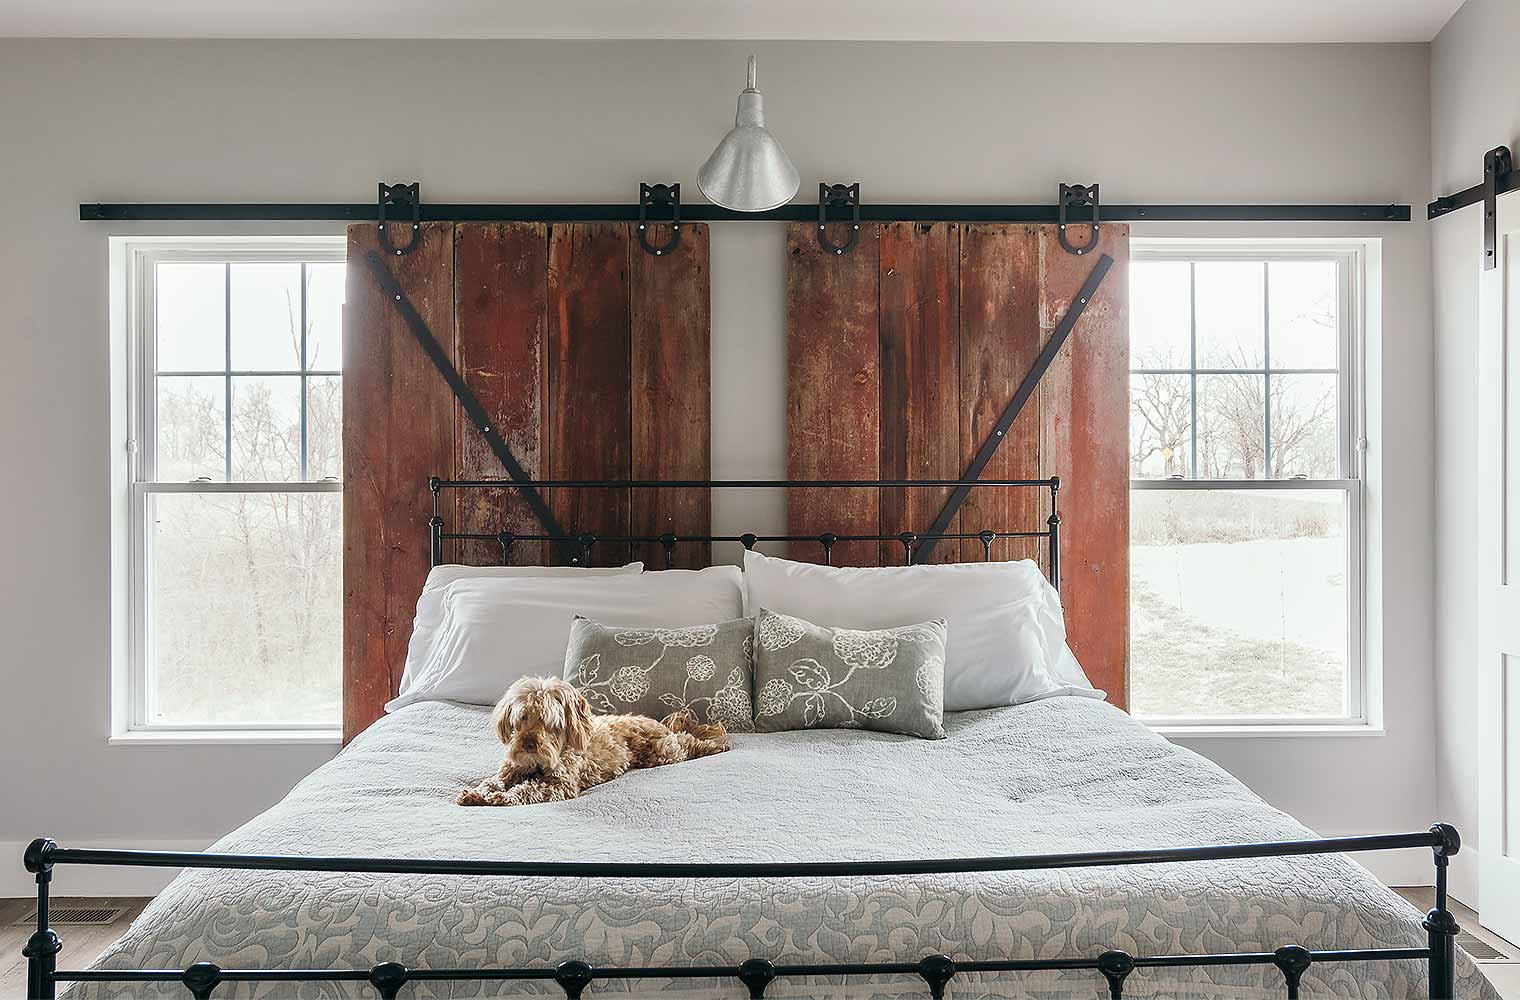 Sliding barn door window treatments in master bedroom of barn style custom new home designed and built by Silent Rivers of Des Moines, Iowa